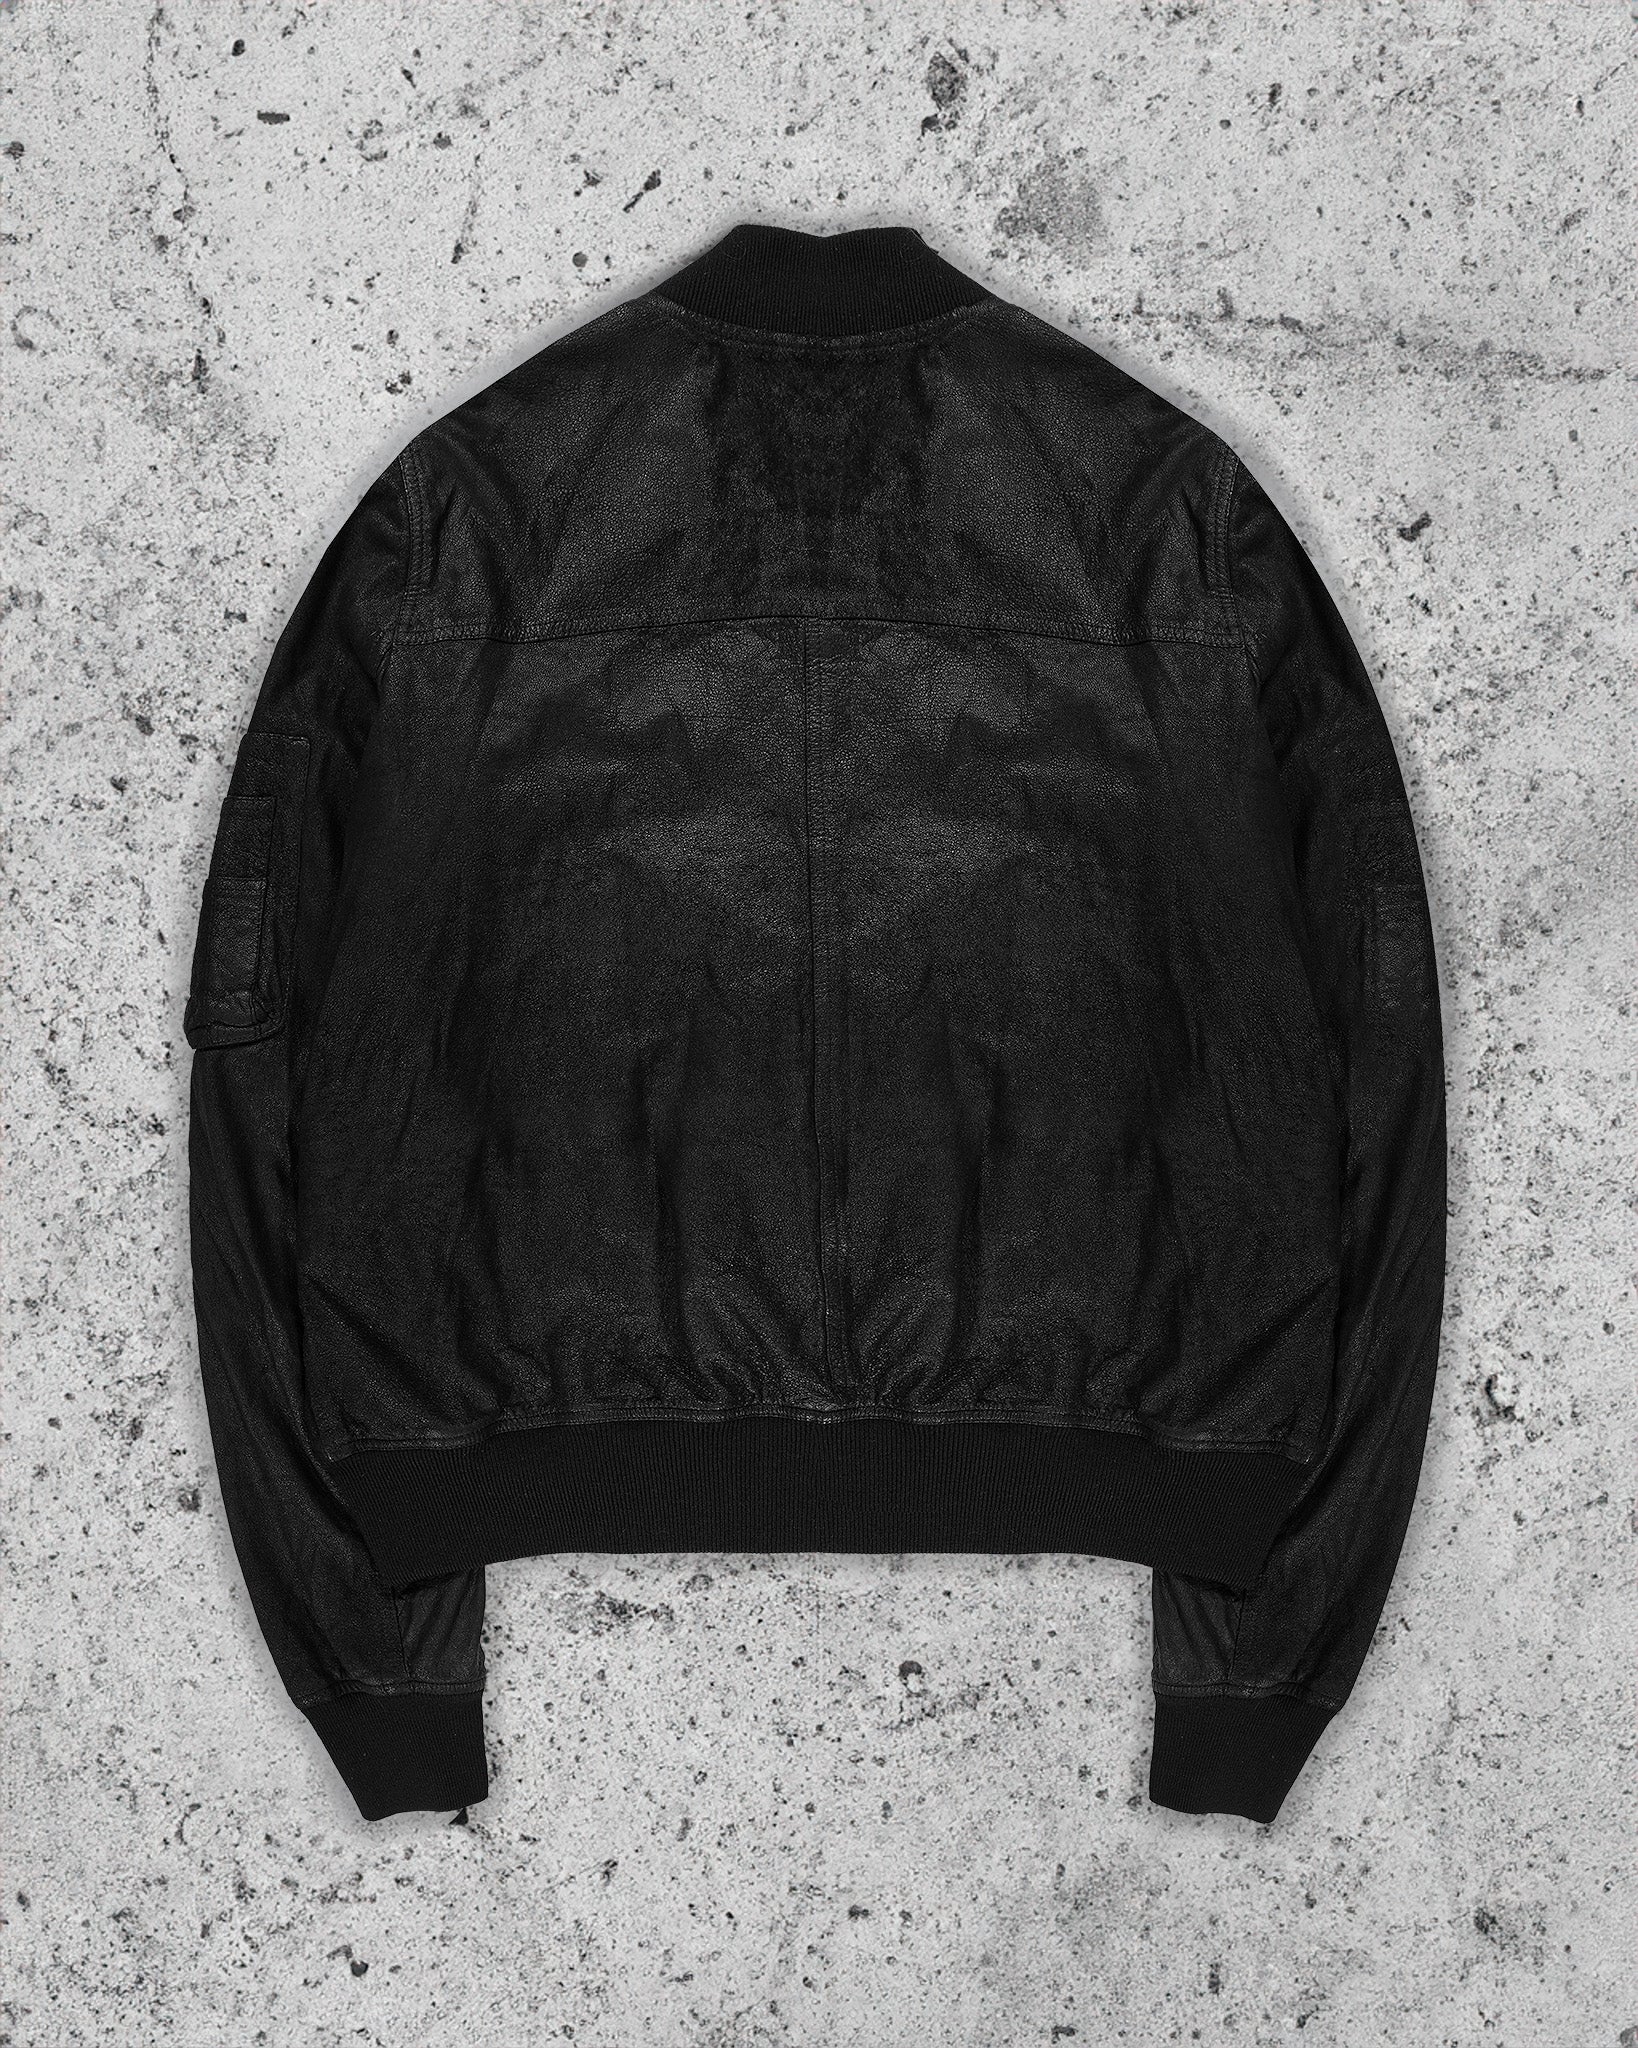 Rick Owens Blistered Leather Bomber Jacket - SS08 "Creatch"